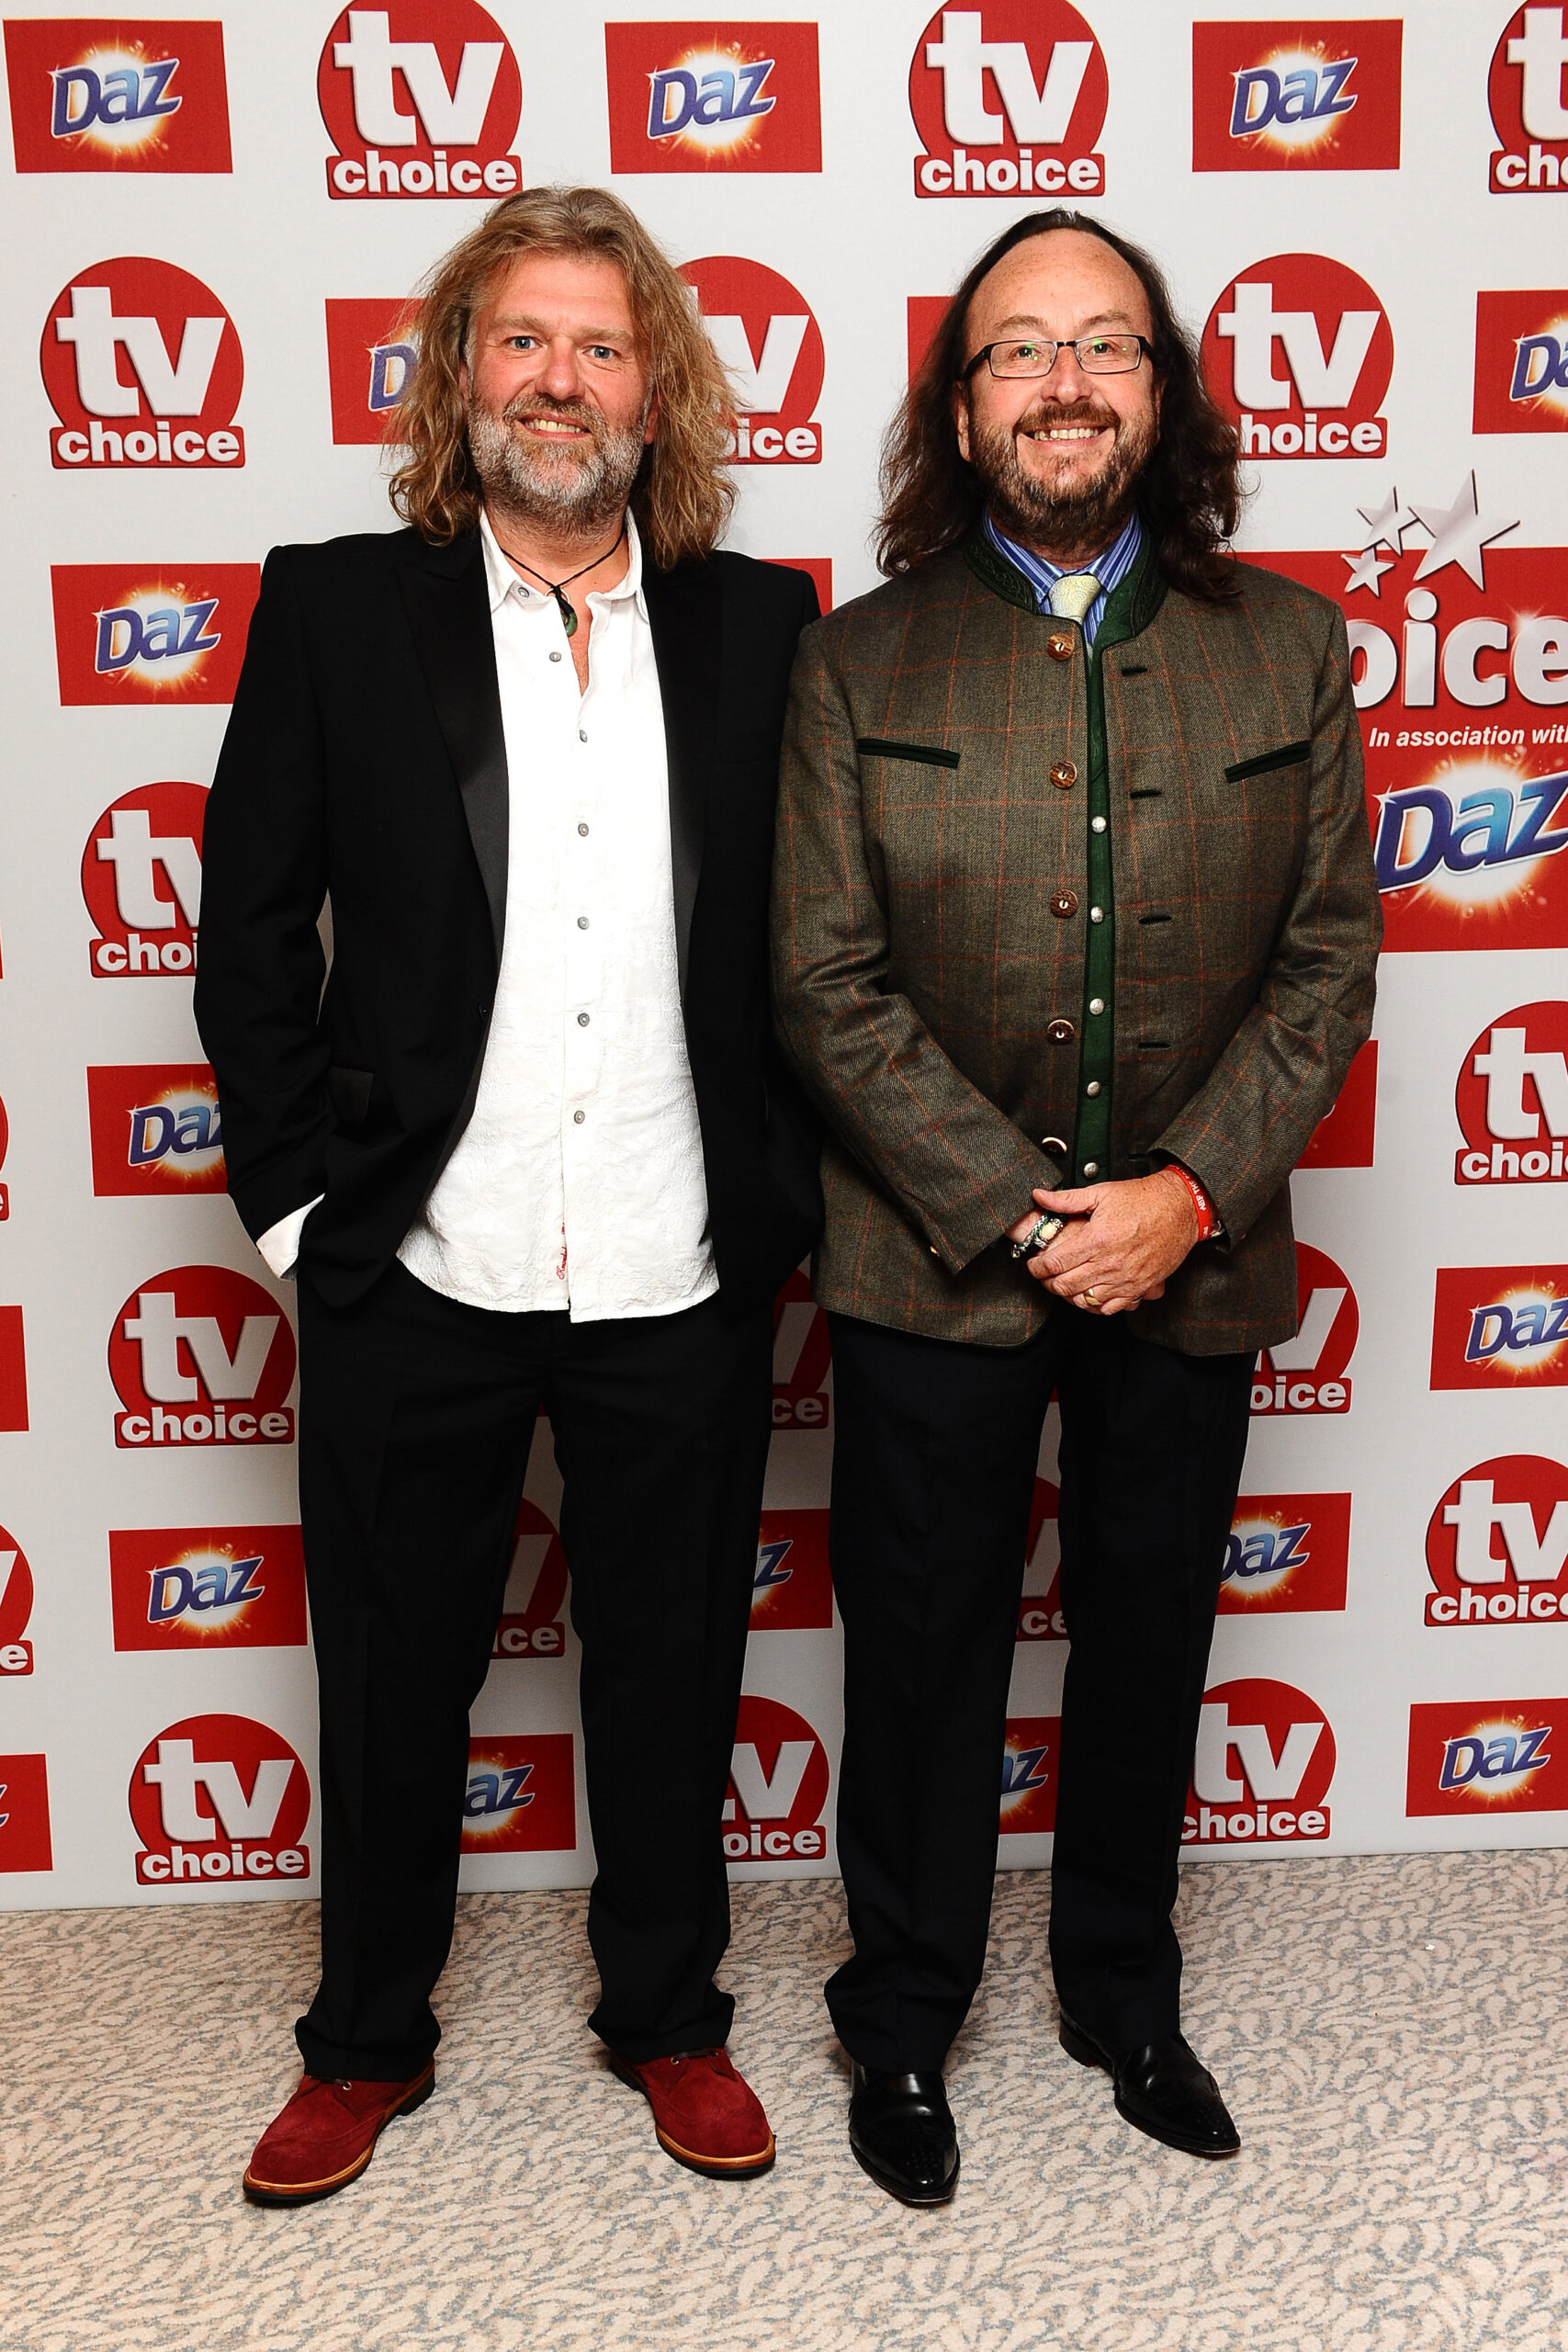 Simon 'Si' King and David Myers (Right), The Hairy Bikers, arrive at the TV Choice Awards at the Dorchester hotel in London. Credit: PA